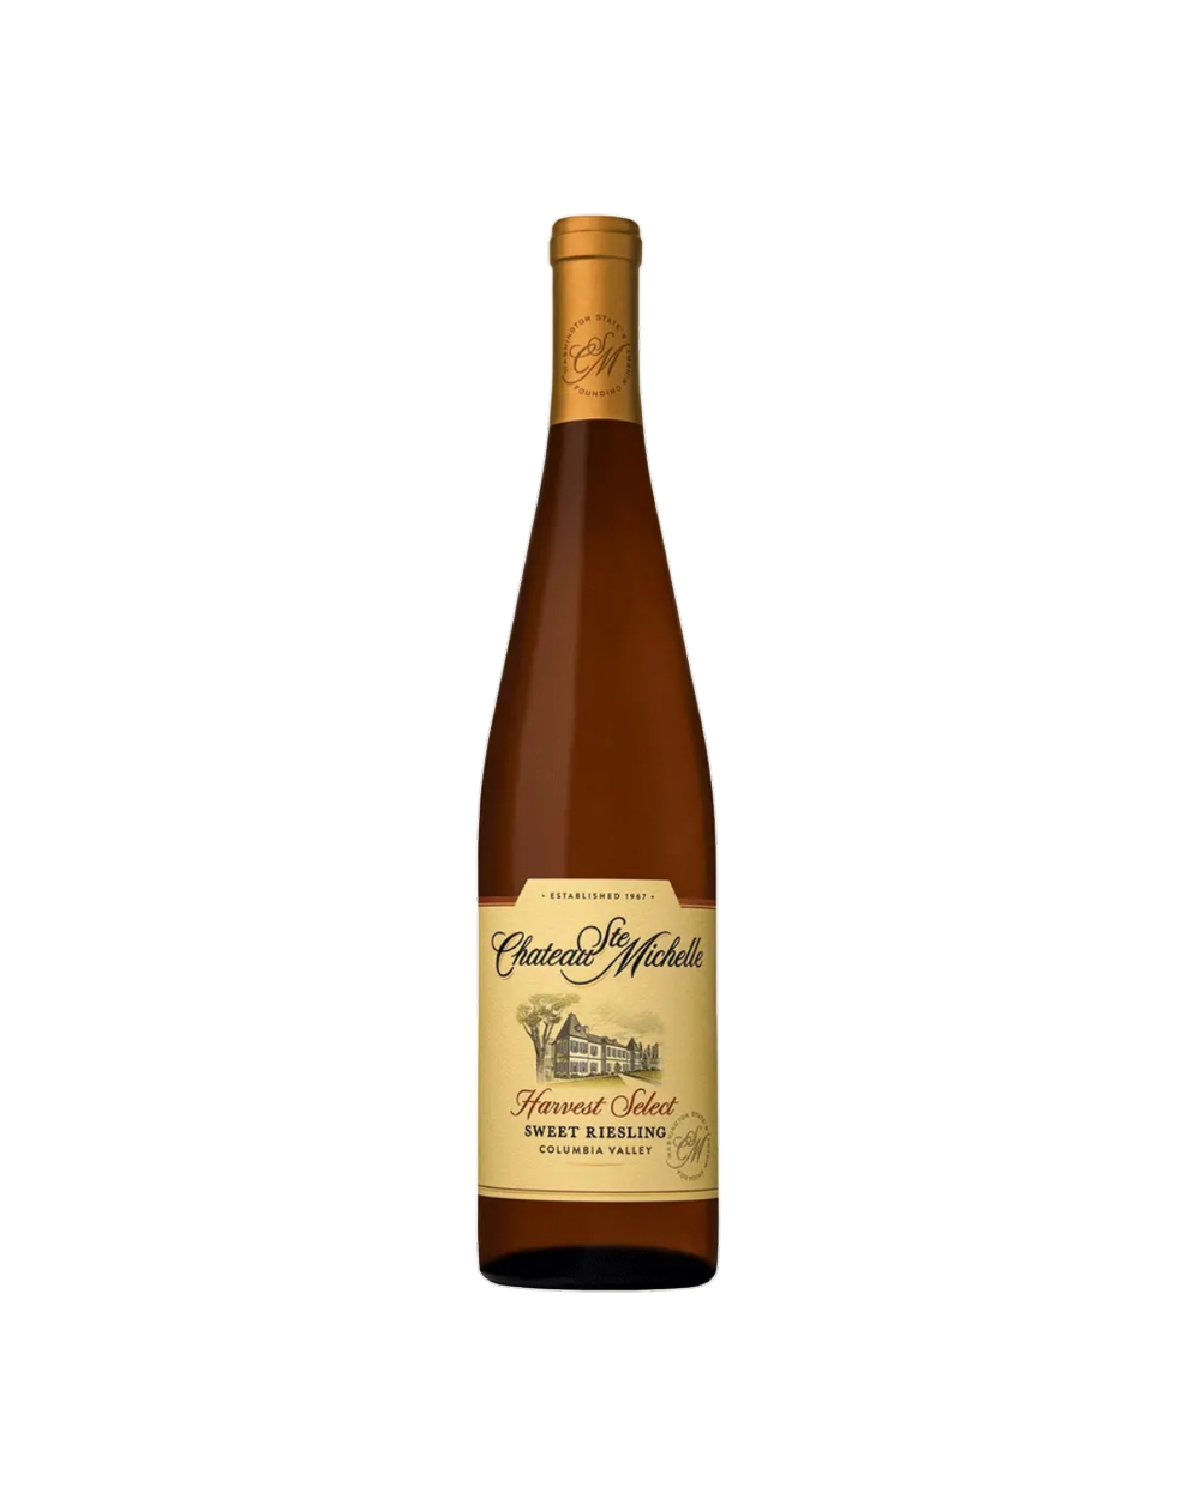 Chateau Ste Michelle sweet Riesling